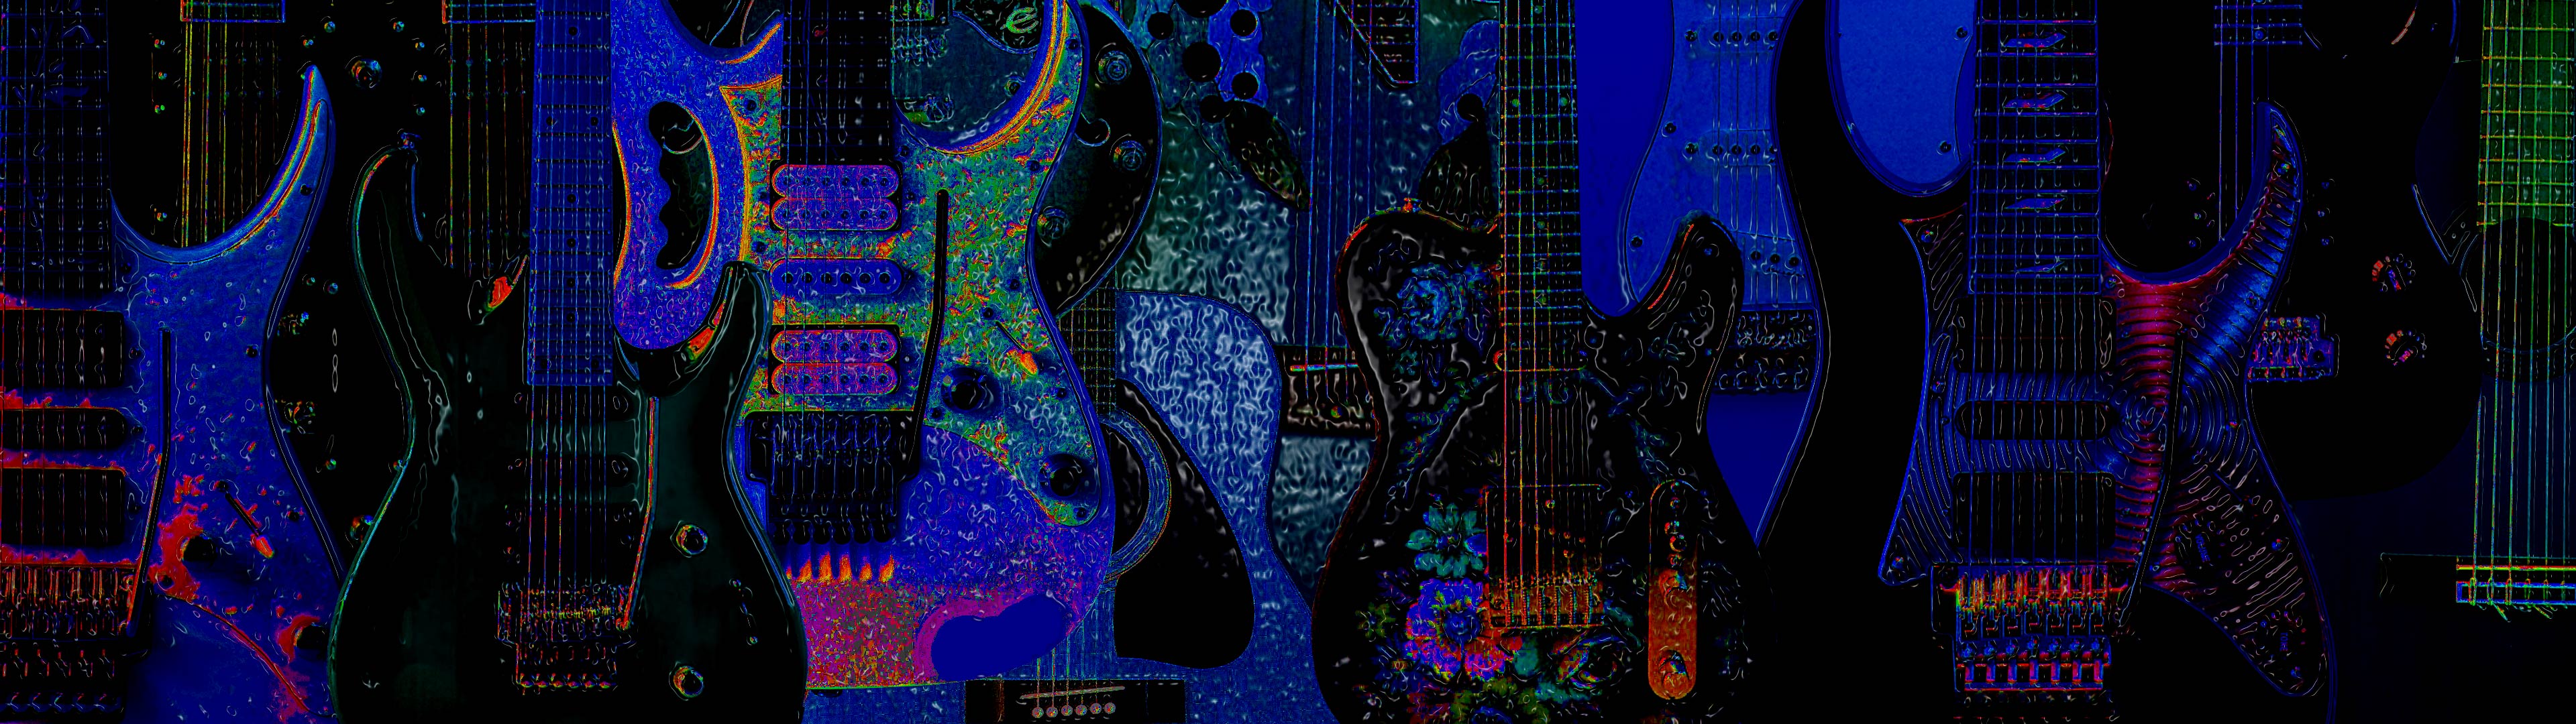 Dual Monitor Guitar Wallpaper From Gch Academy